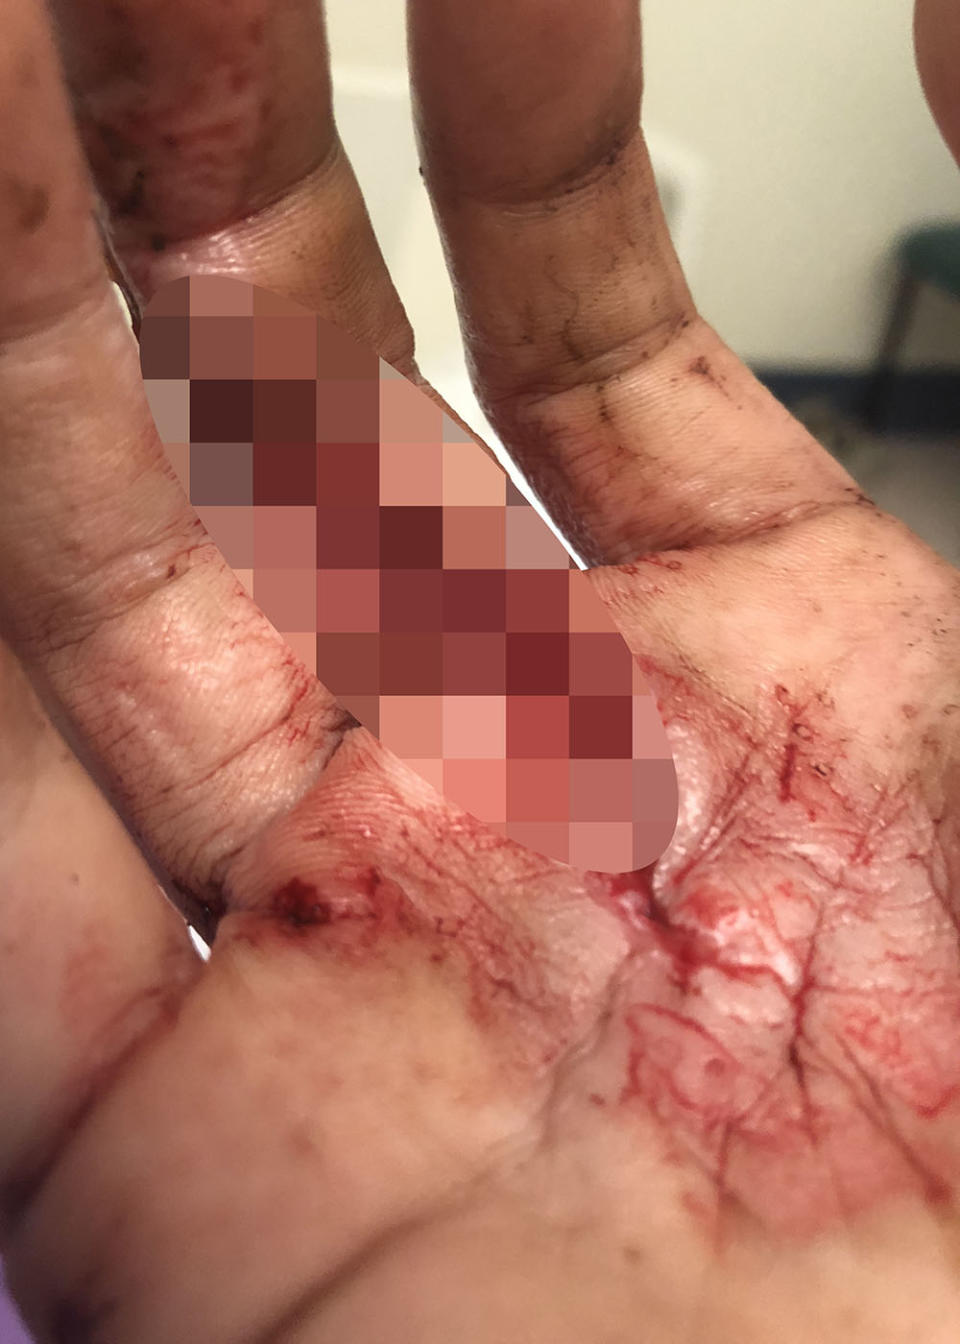 Sarah Wylie’s hand injury, which she sustained as she fell down the mountain in Queensland. Source: Caters